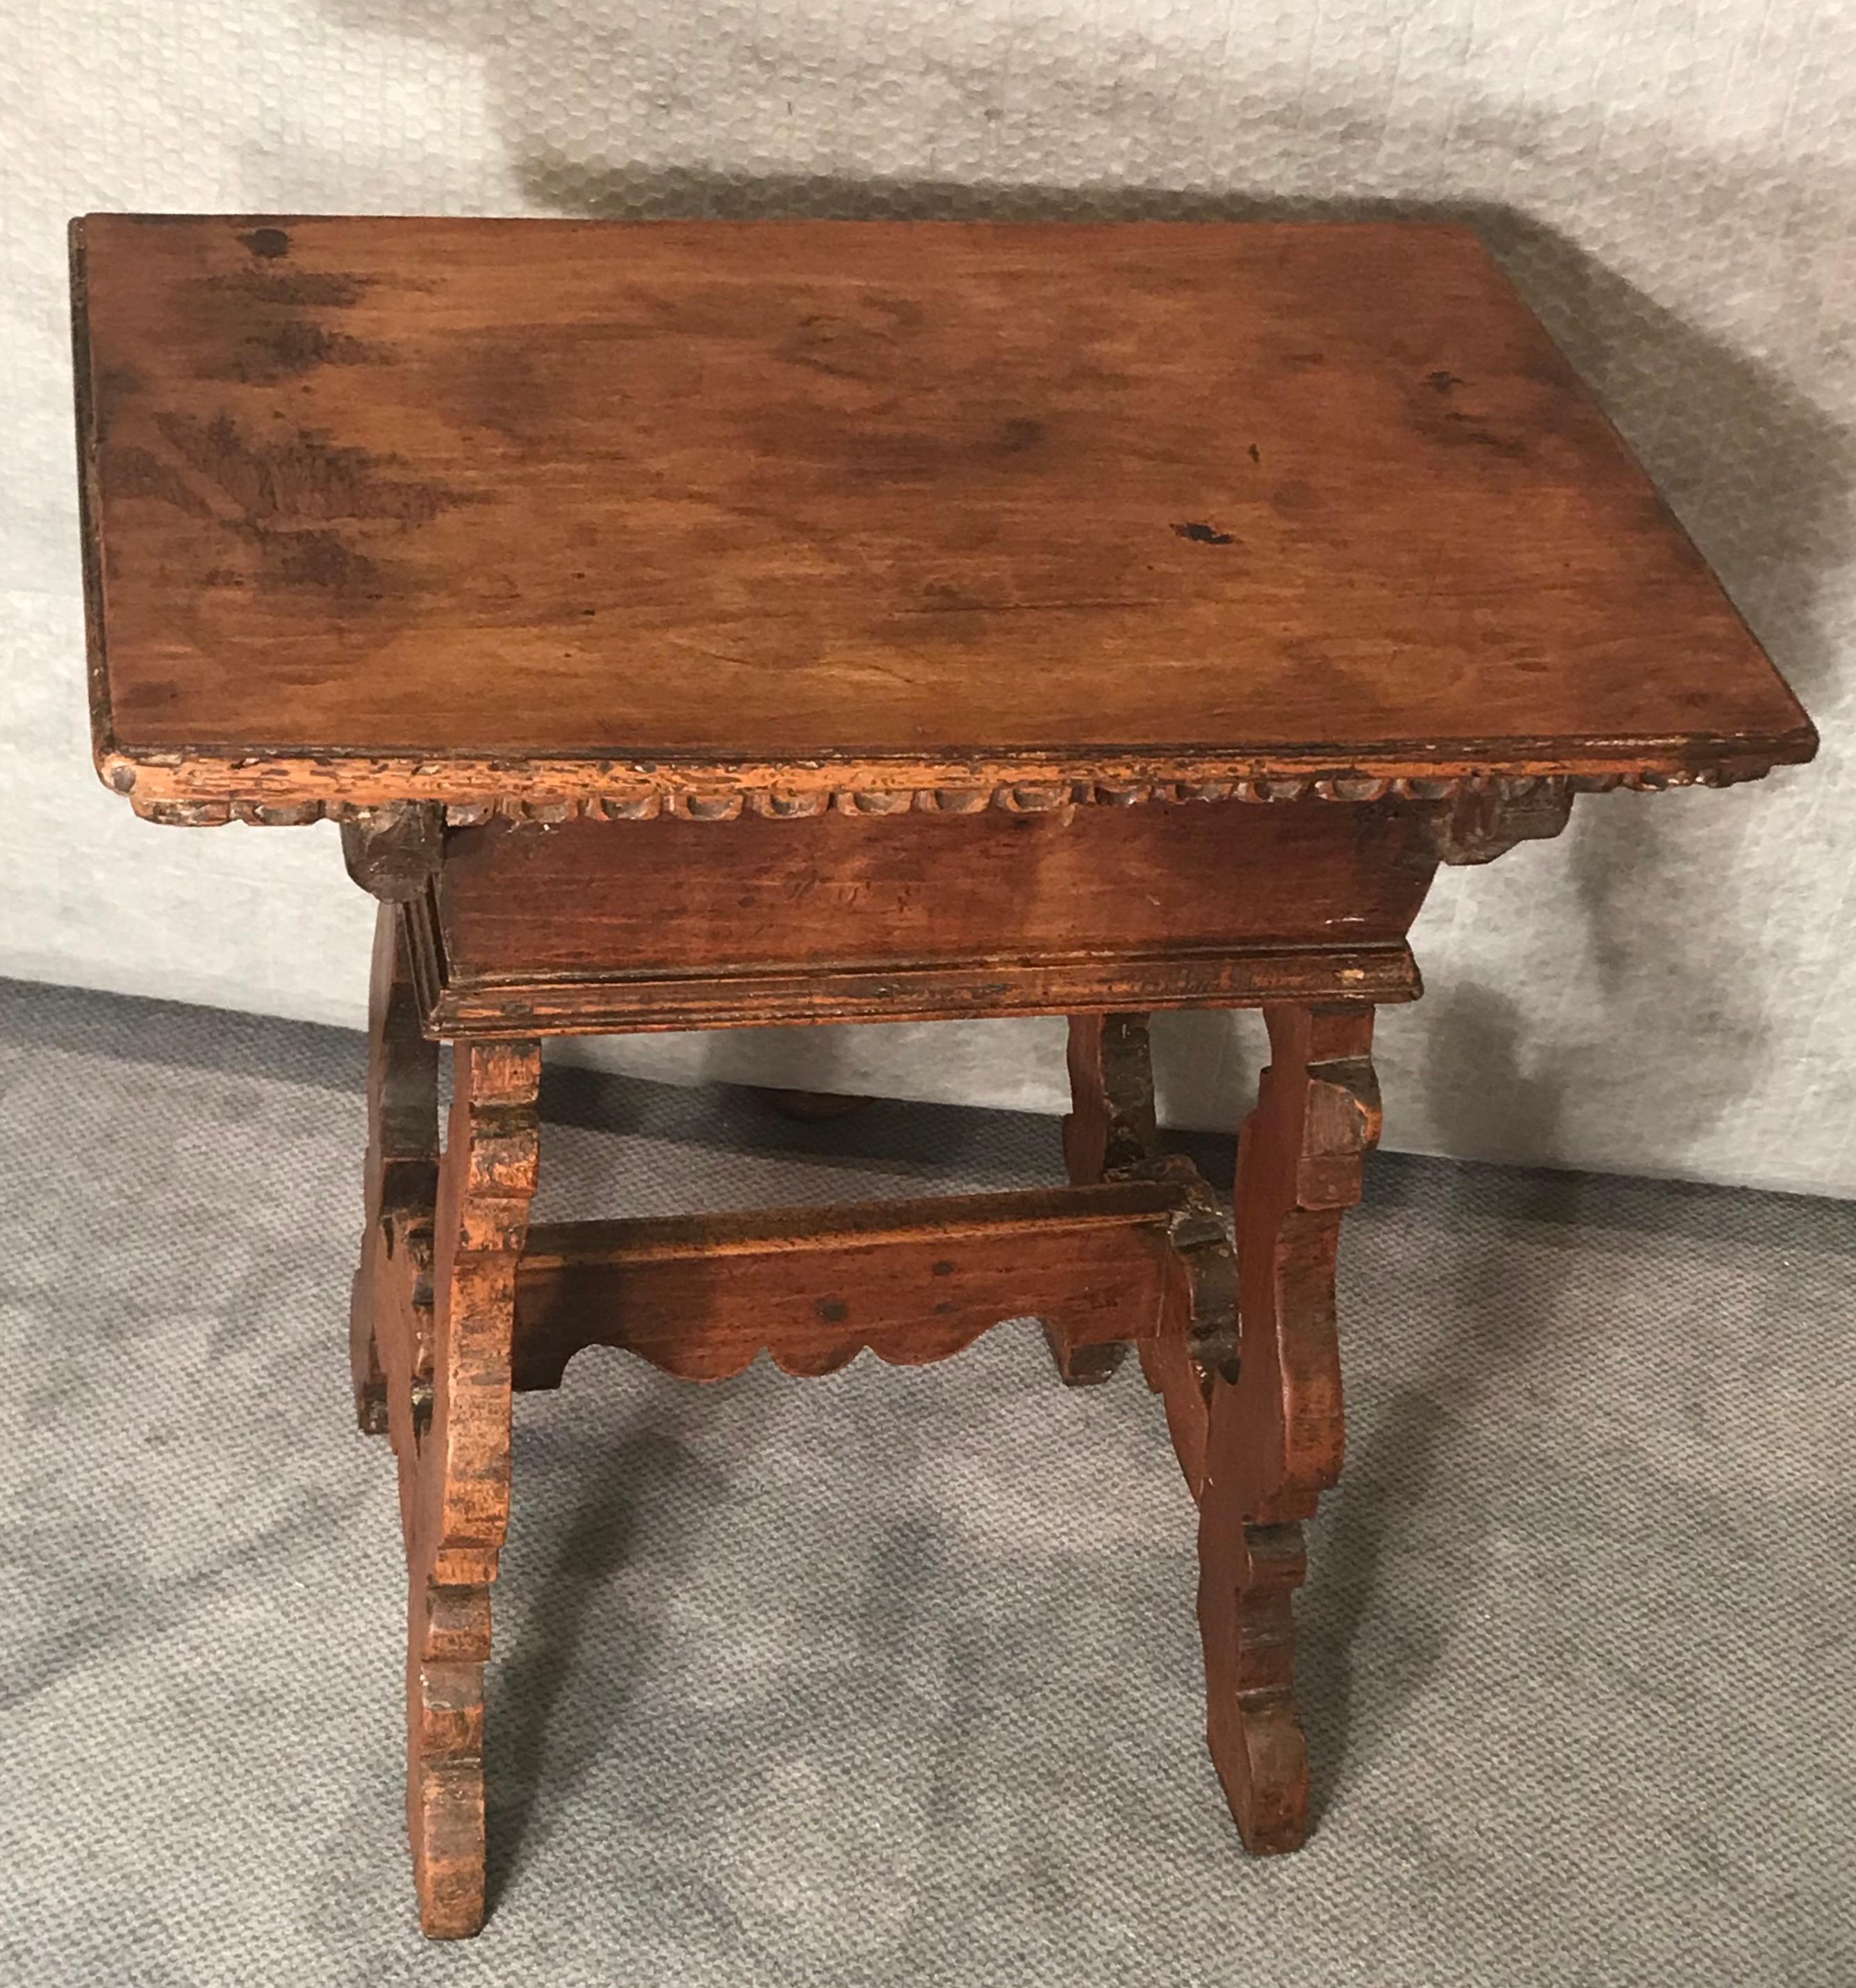 Italian trestle side table, probably Tuscany 17th century.
Beautiful antique table in walnut. The rectangular tabletop raised on trestle end supports joined by a wooden stretcher. The table has one central drawer ( the wooden knob is later). The